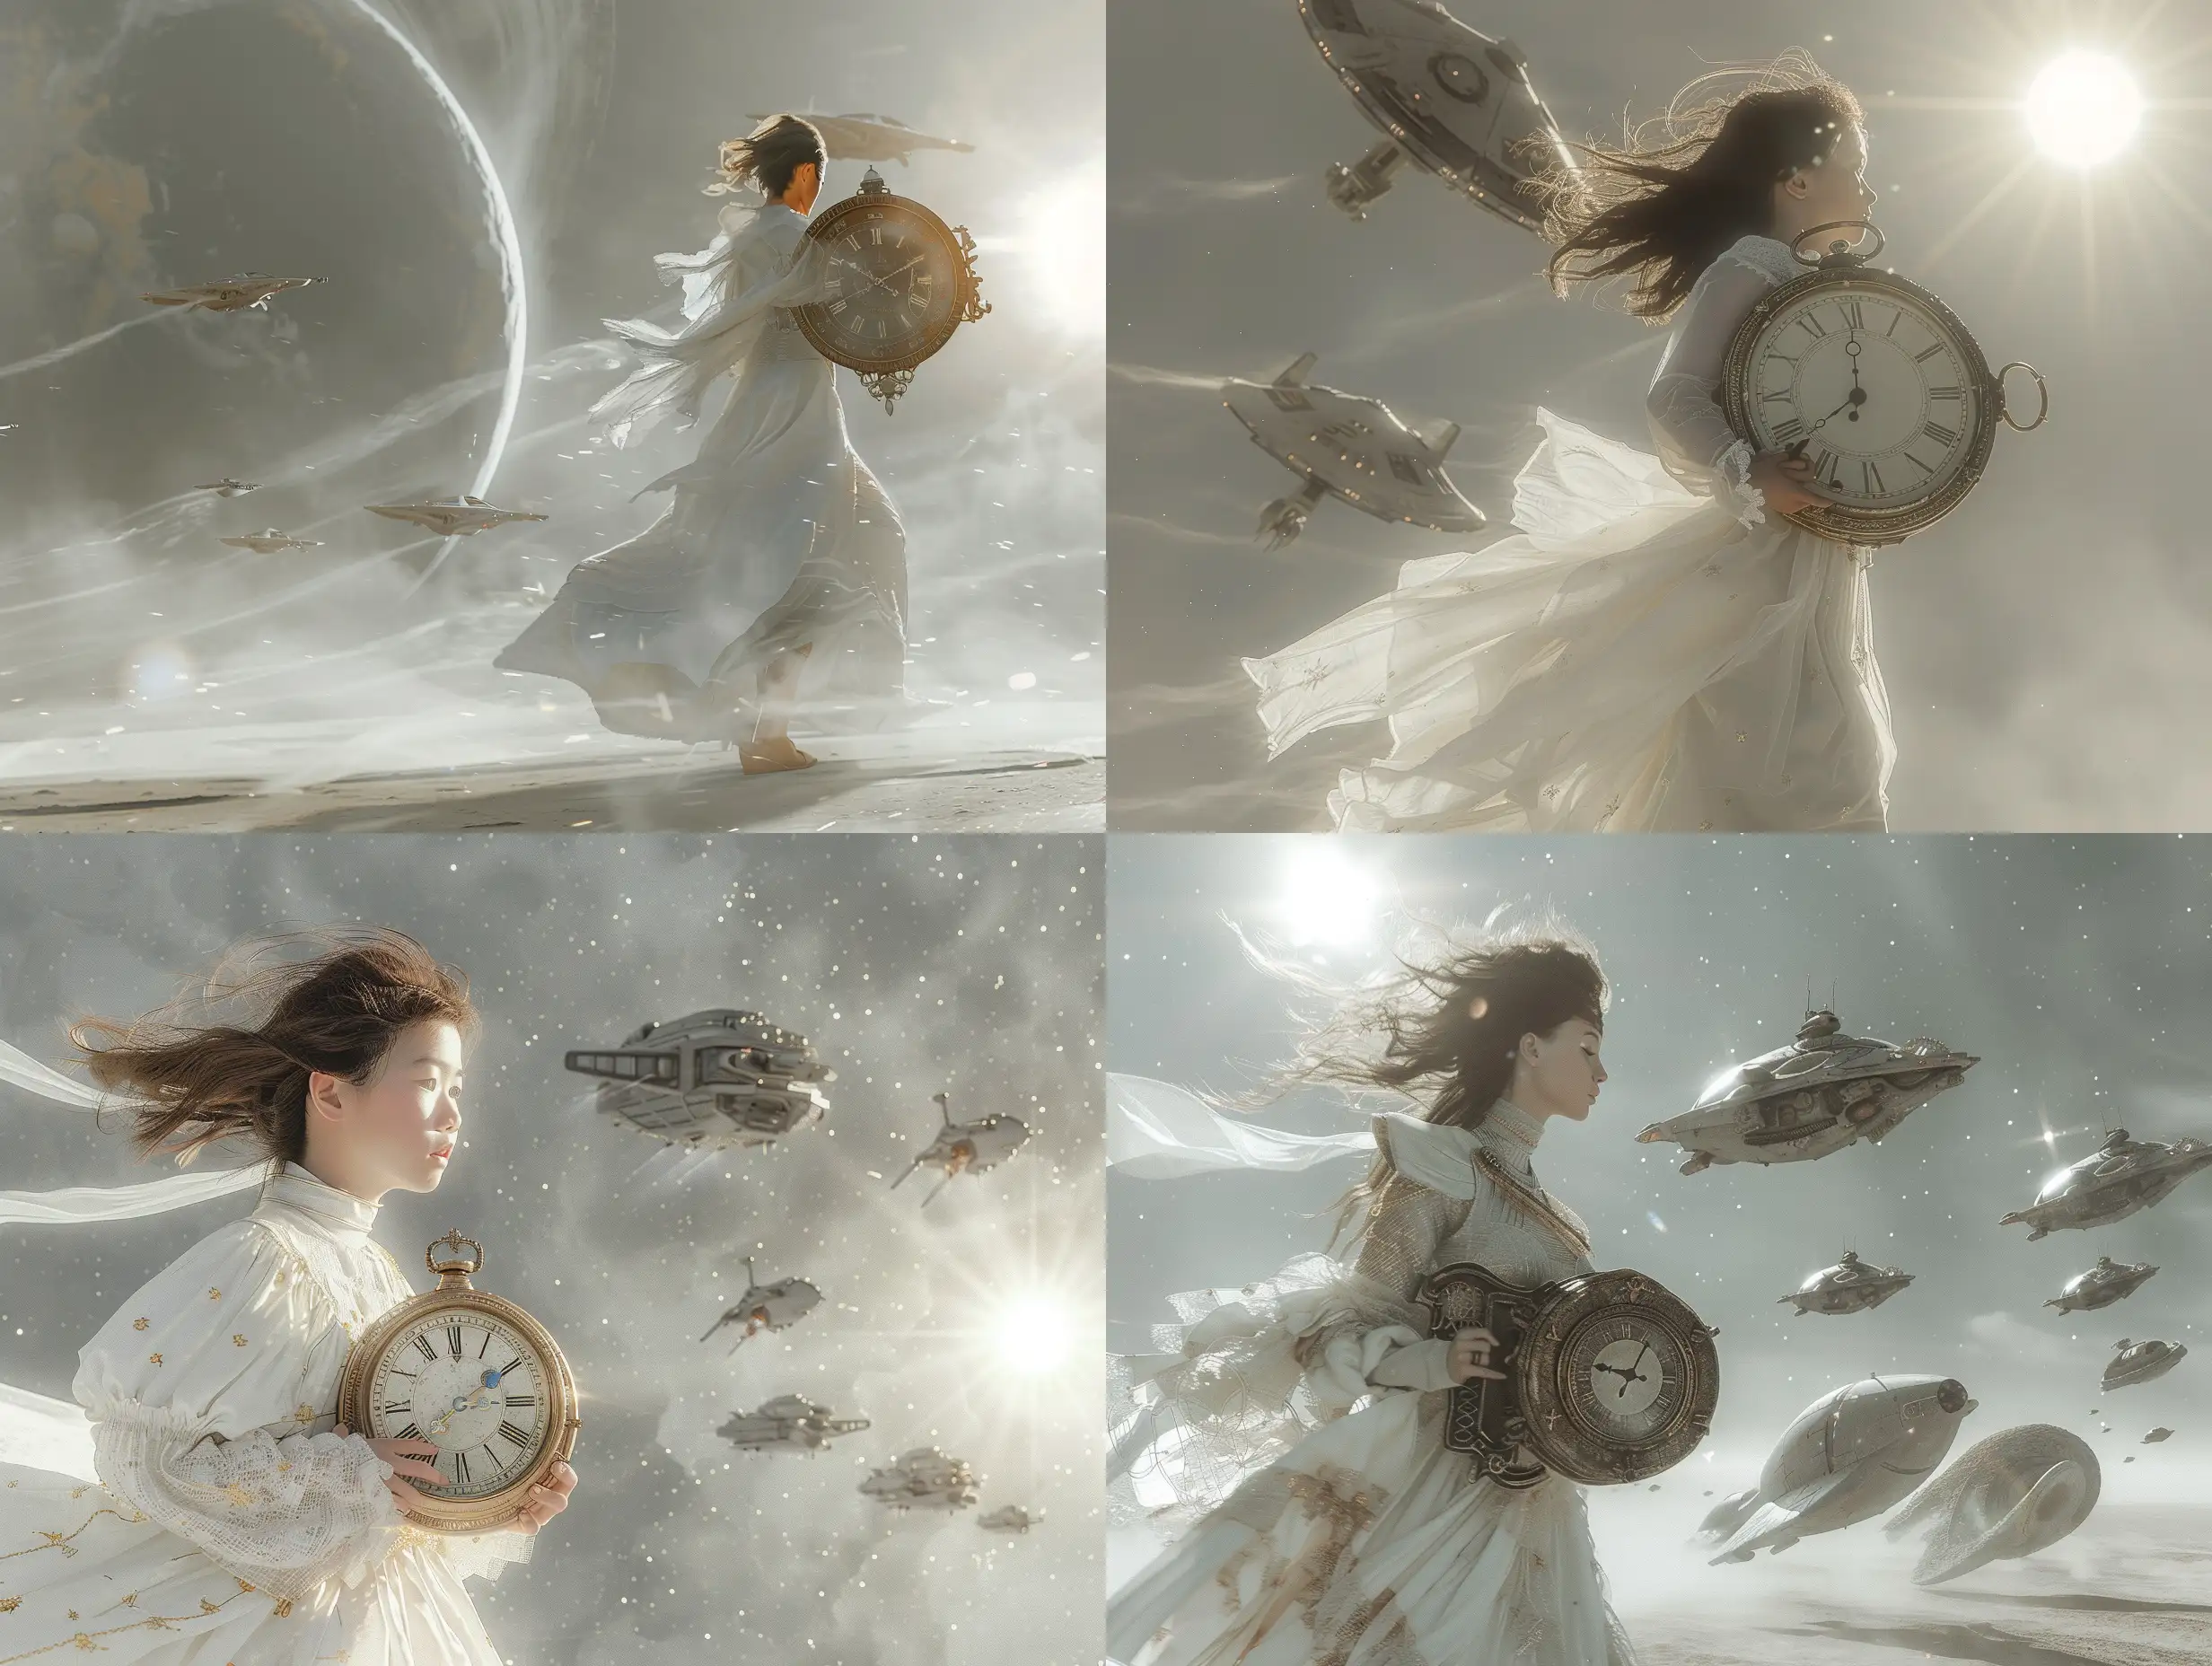 Mystical-Girl-with-Antique-Clock-Ethereal-Journey-Amidst-Space-Ships